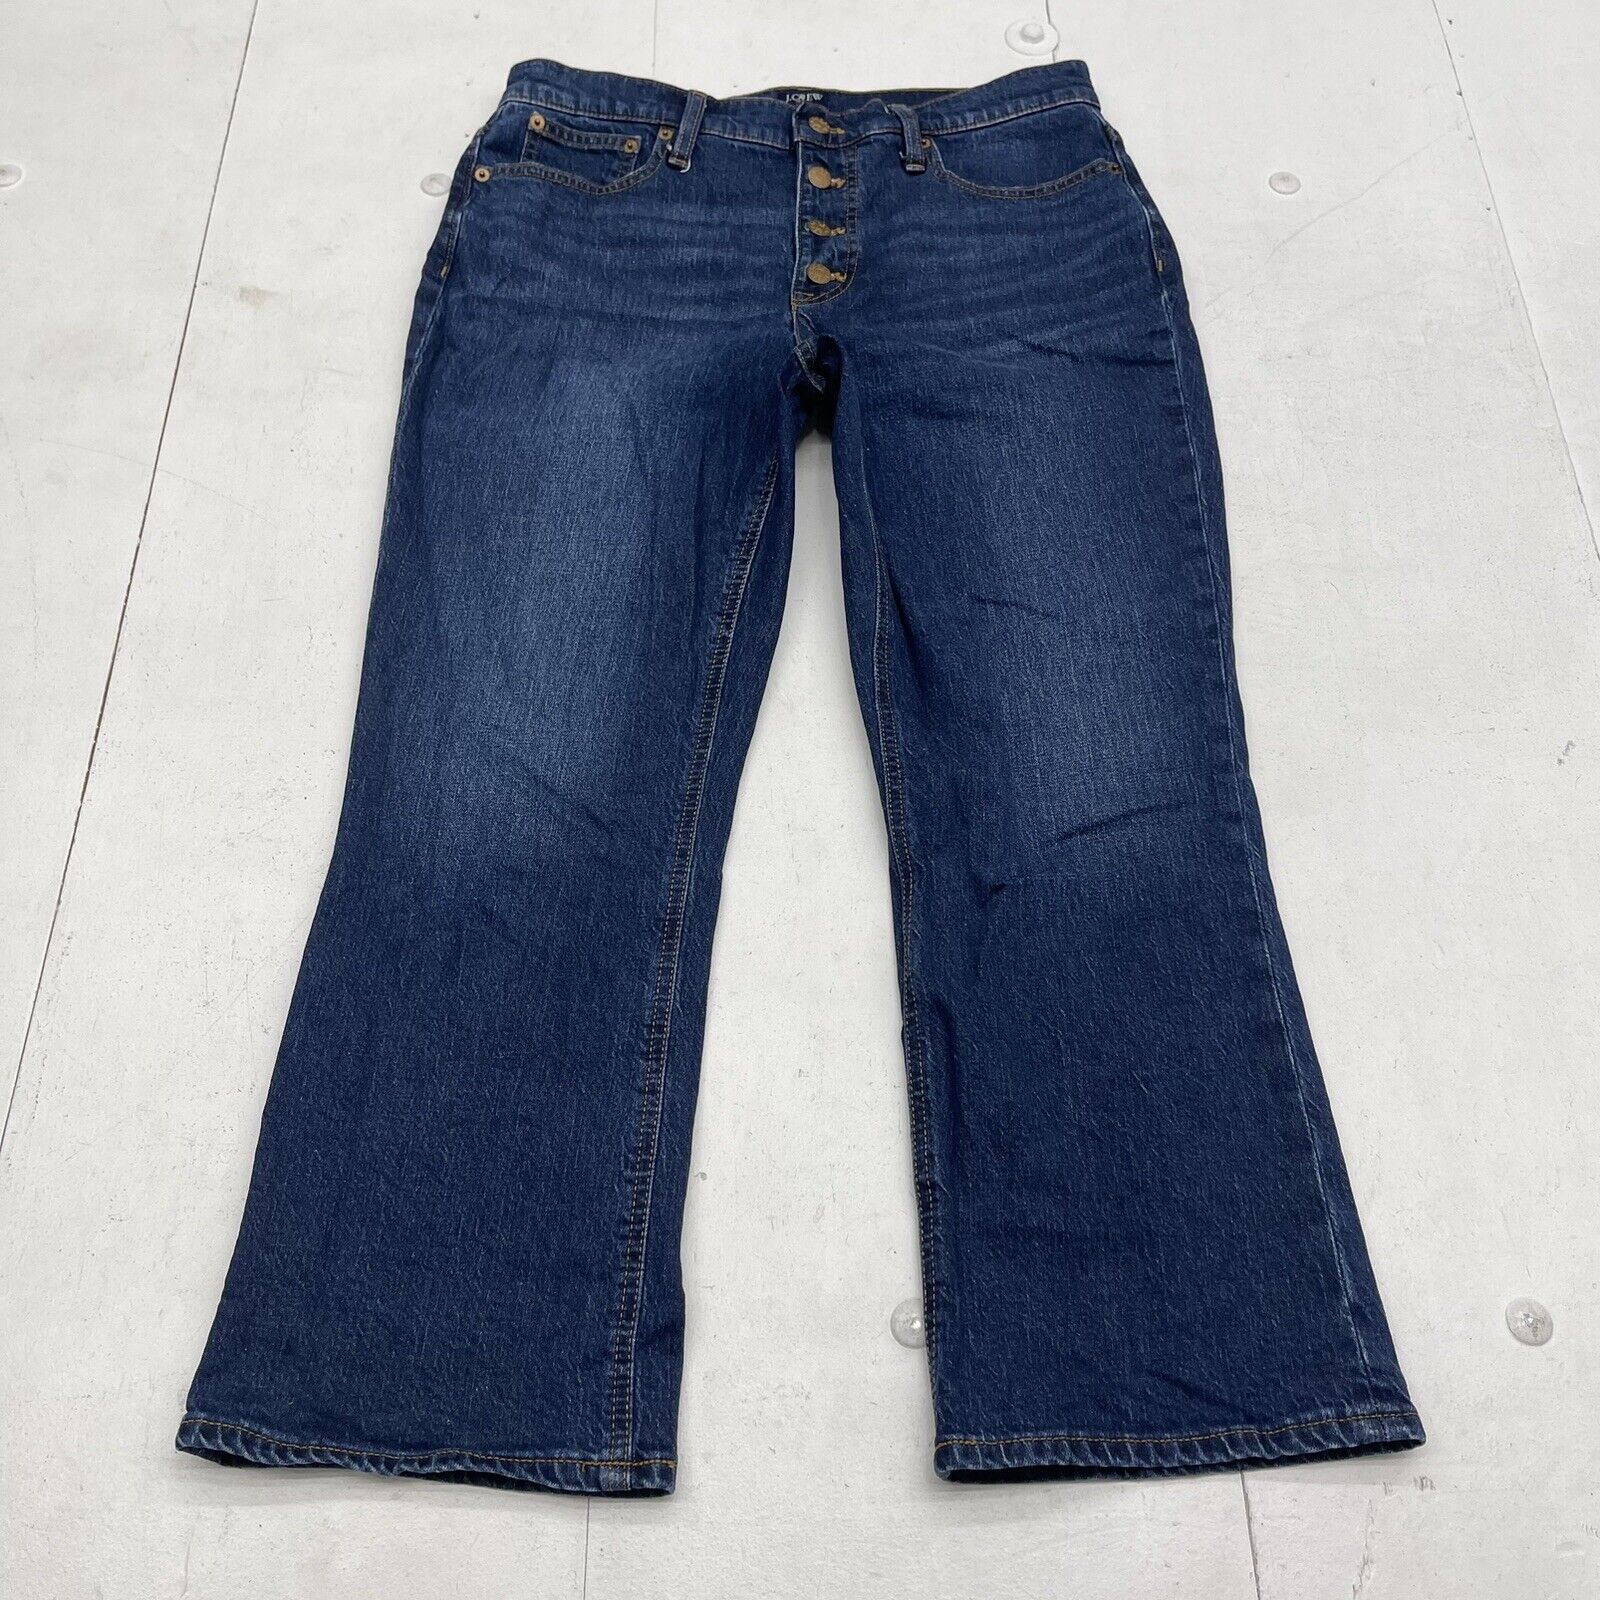 J Crew Mid Rise Flare Crop Button Fly Jeans Women’s Size 30